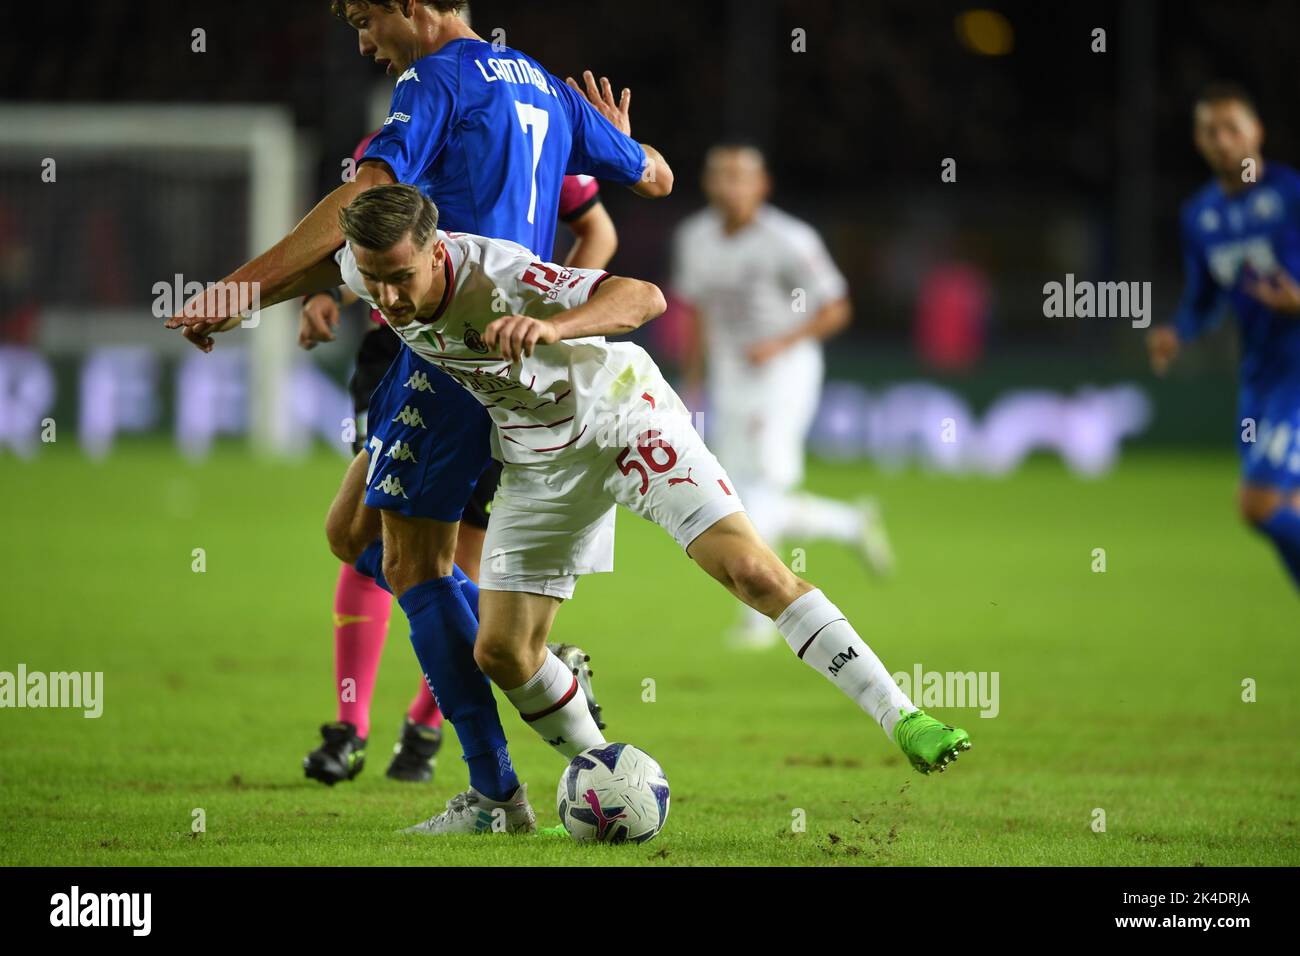 Alexis Saelemaekers (Milan)Sam Lammers (Empoli) during the "Serie A" match between match between Empoli 1-3 Milan at Carlo Castellani Stadium on October 1, 2022 in Empoli, Italy. Credit: Maurizio Borsari/AFLO/Alamy Live News Stock Photo